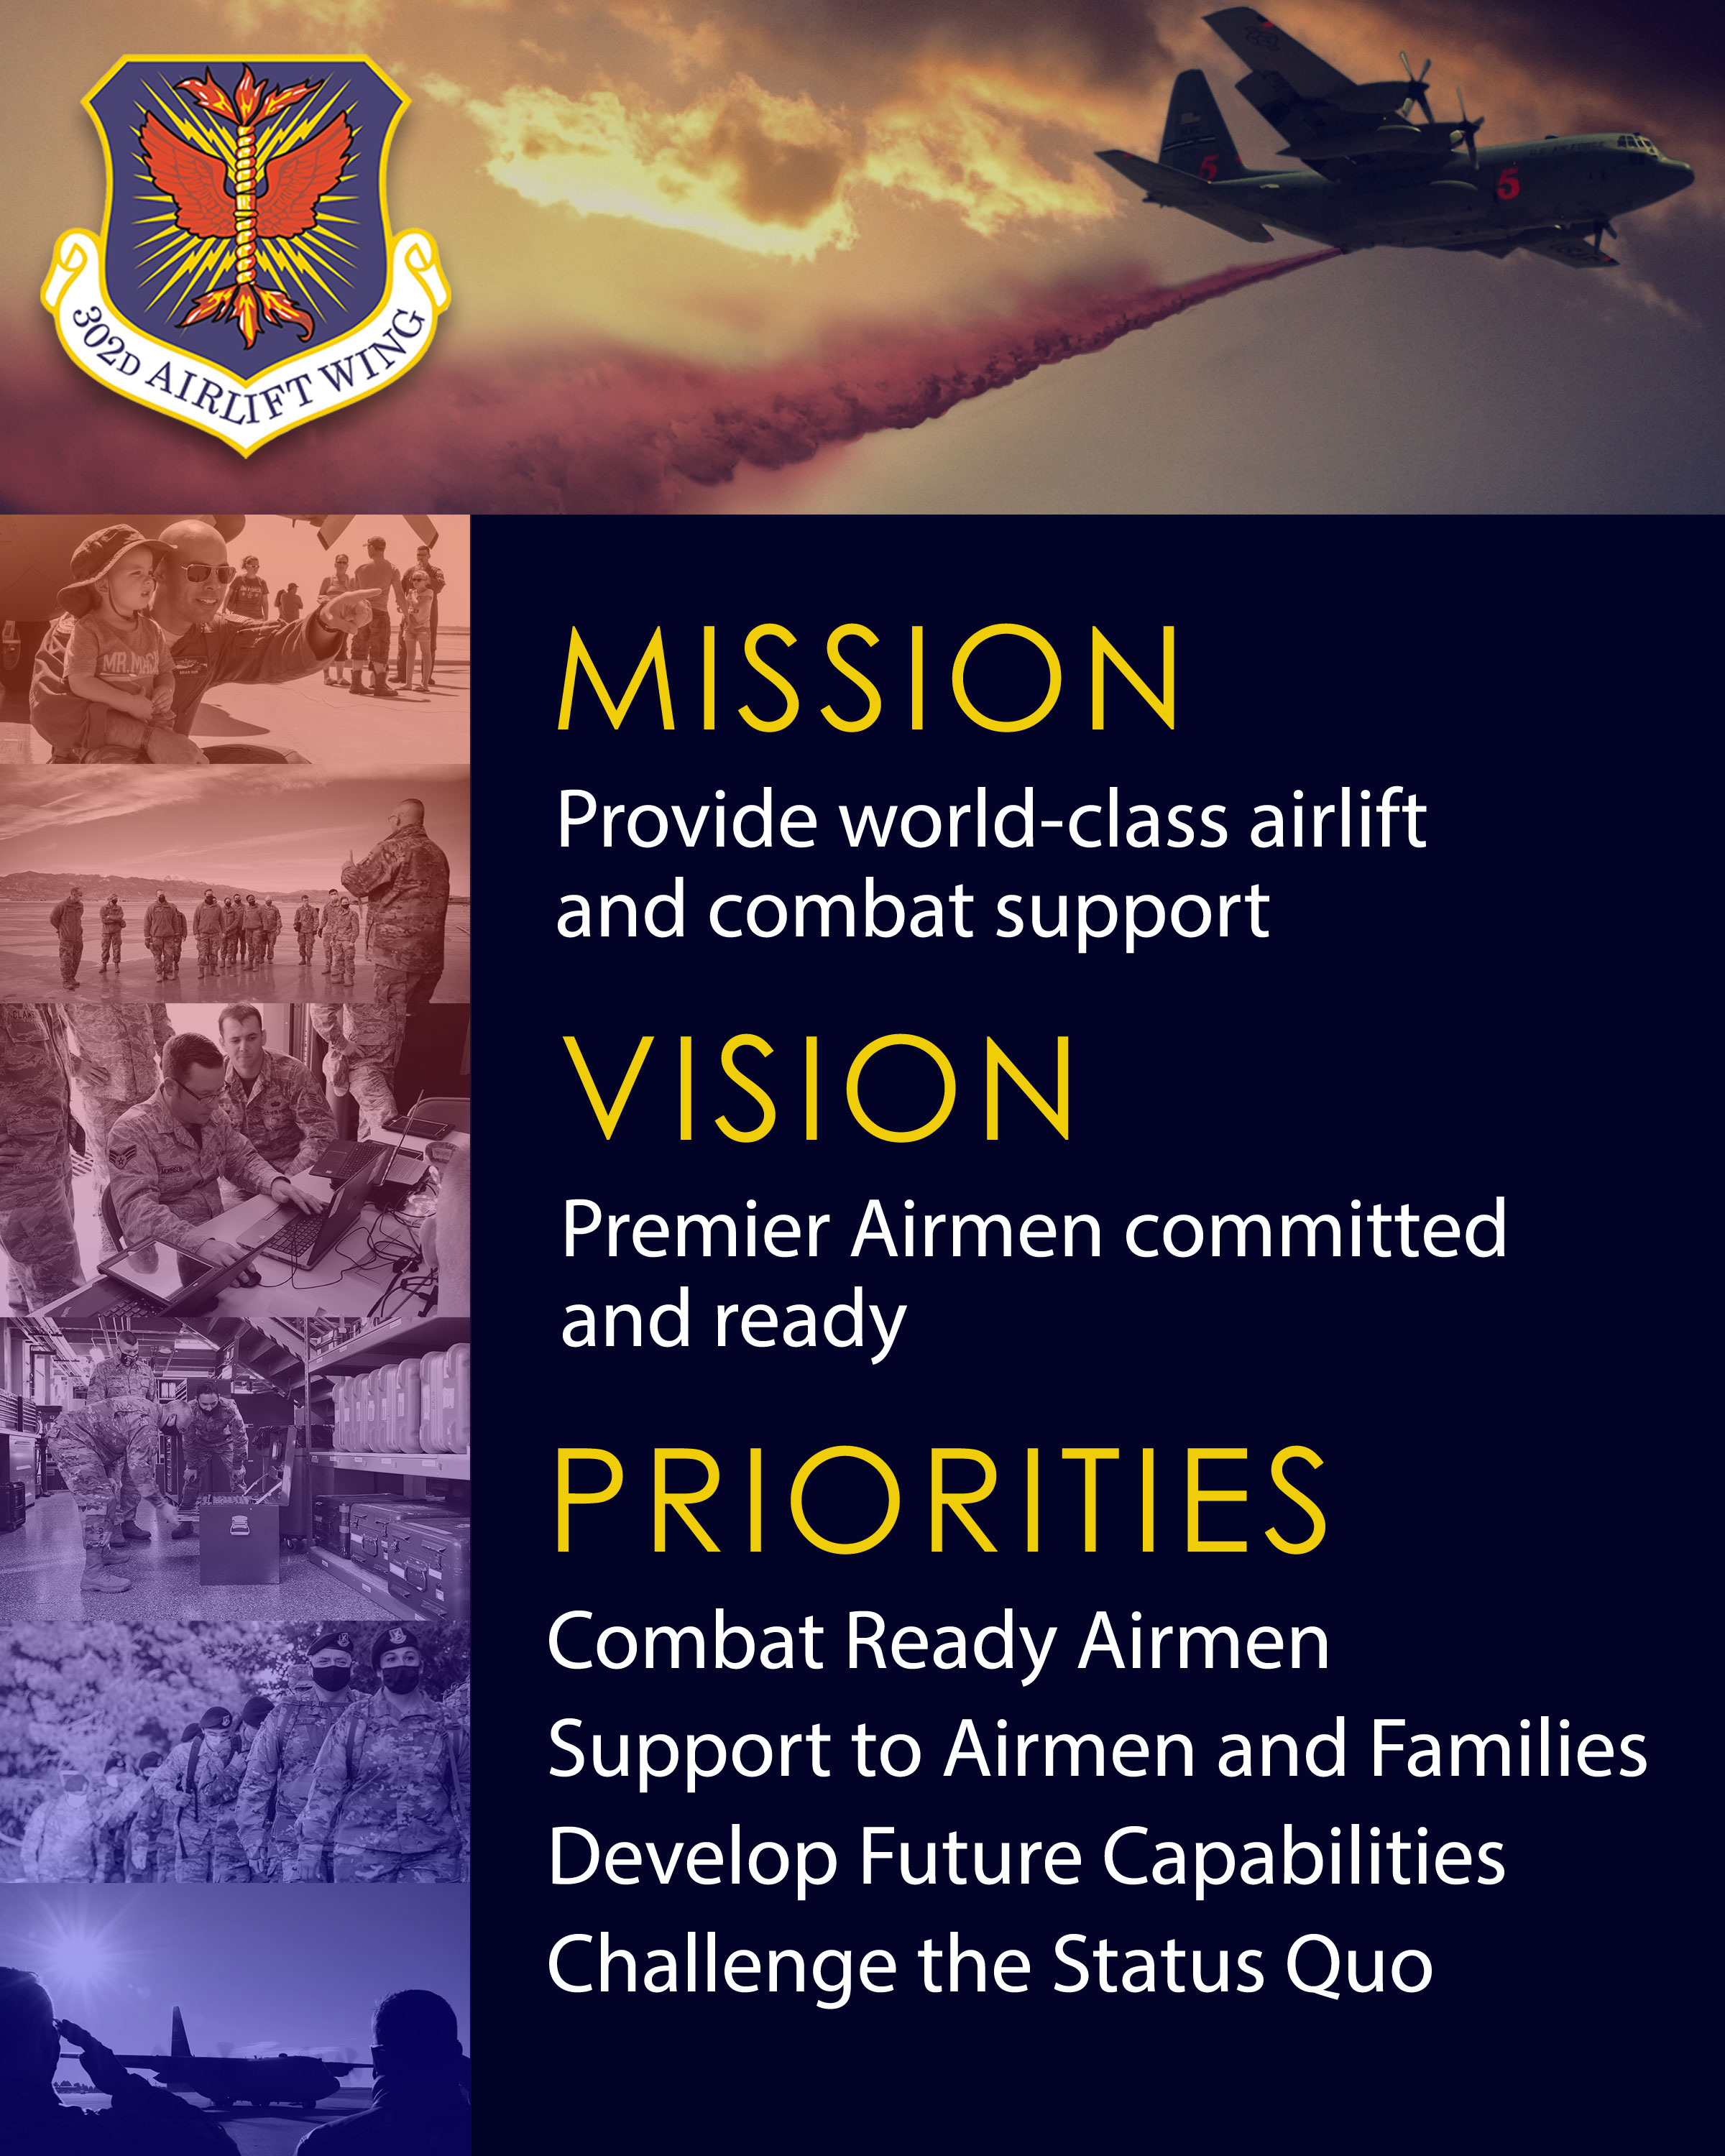 302 AW Graphic - MISSION/VISION/PRIORITIES